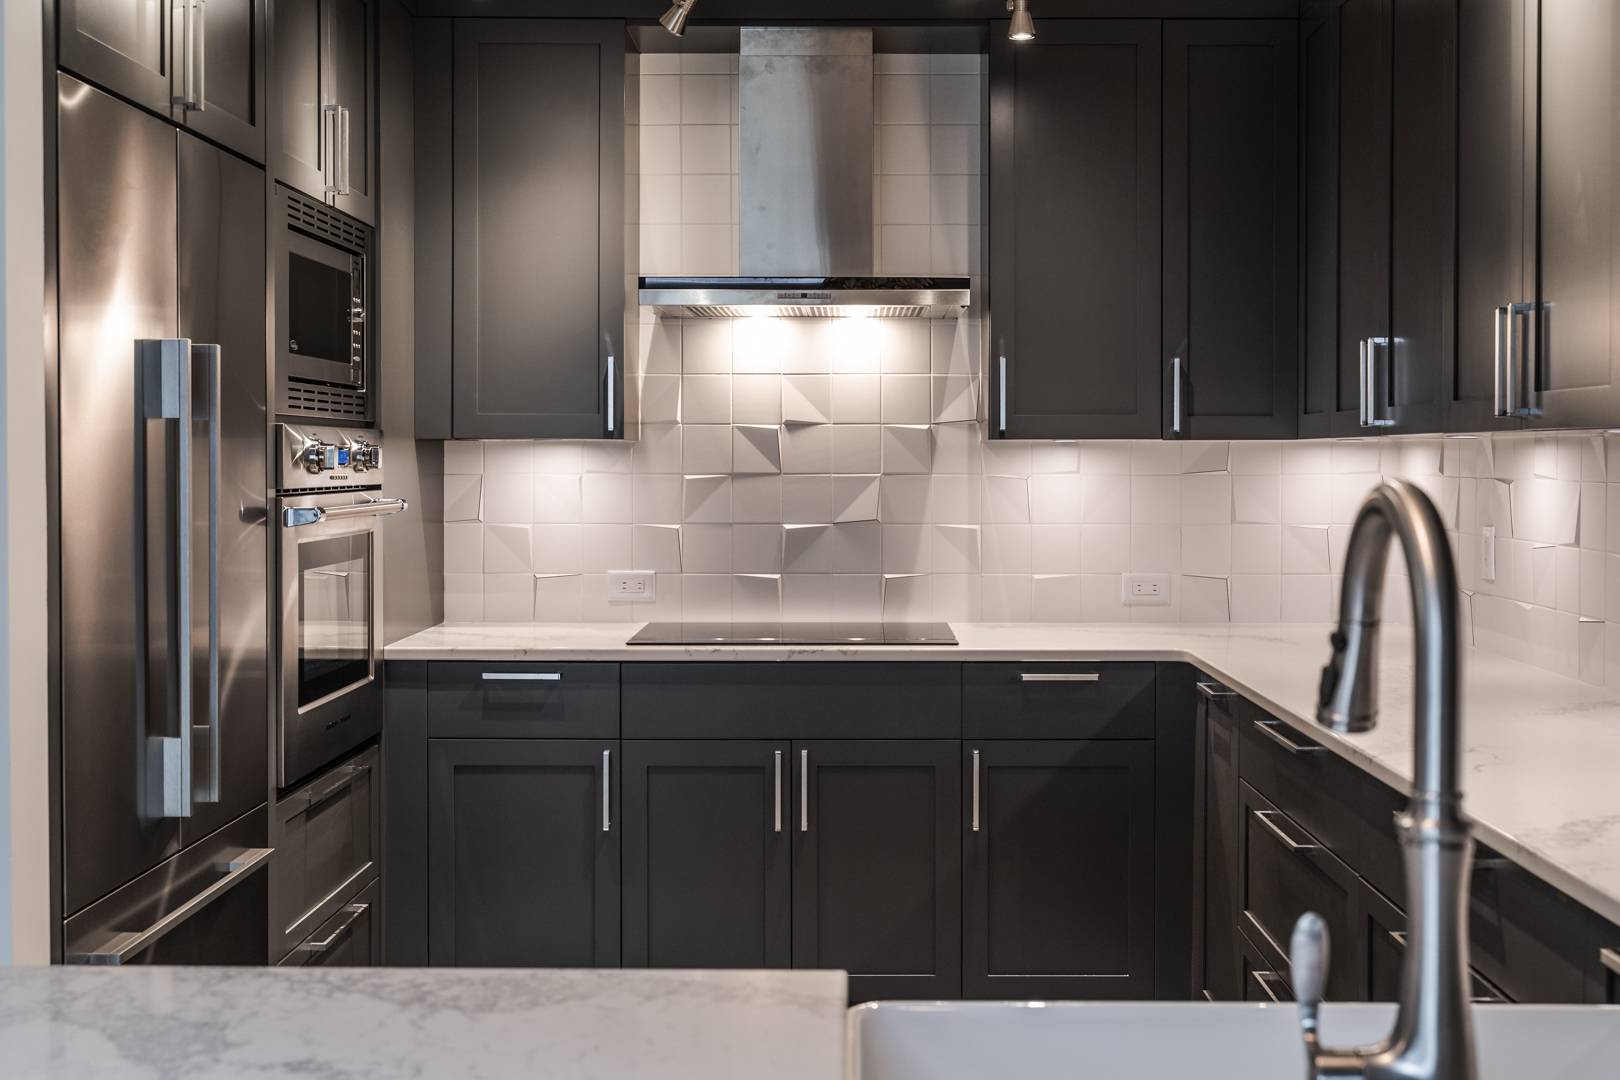 Modern kitchen with dark cabinets, marble countertops, and unique backsplash featuring projecting tile corners